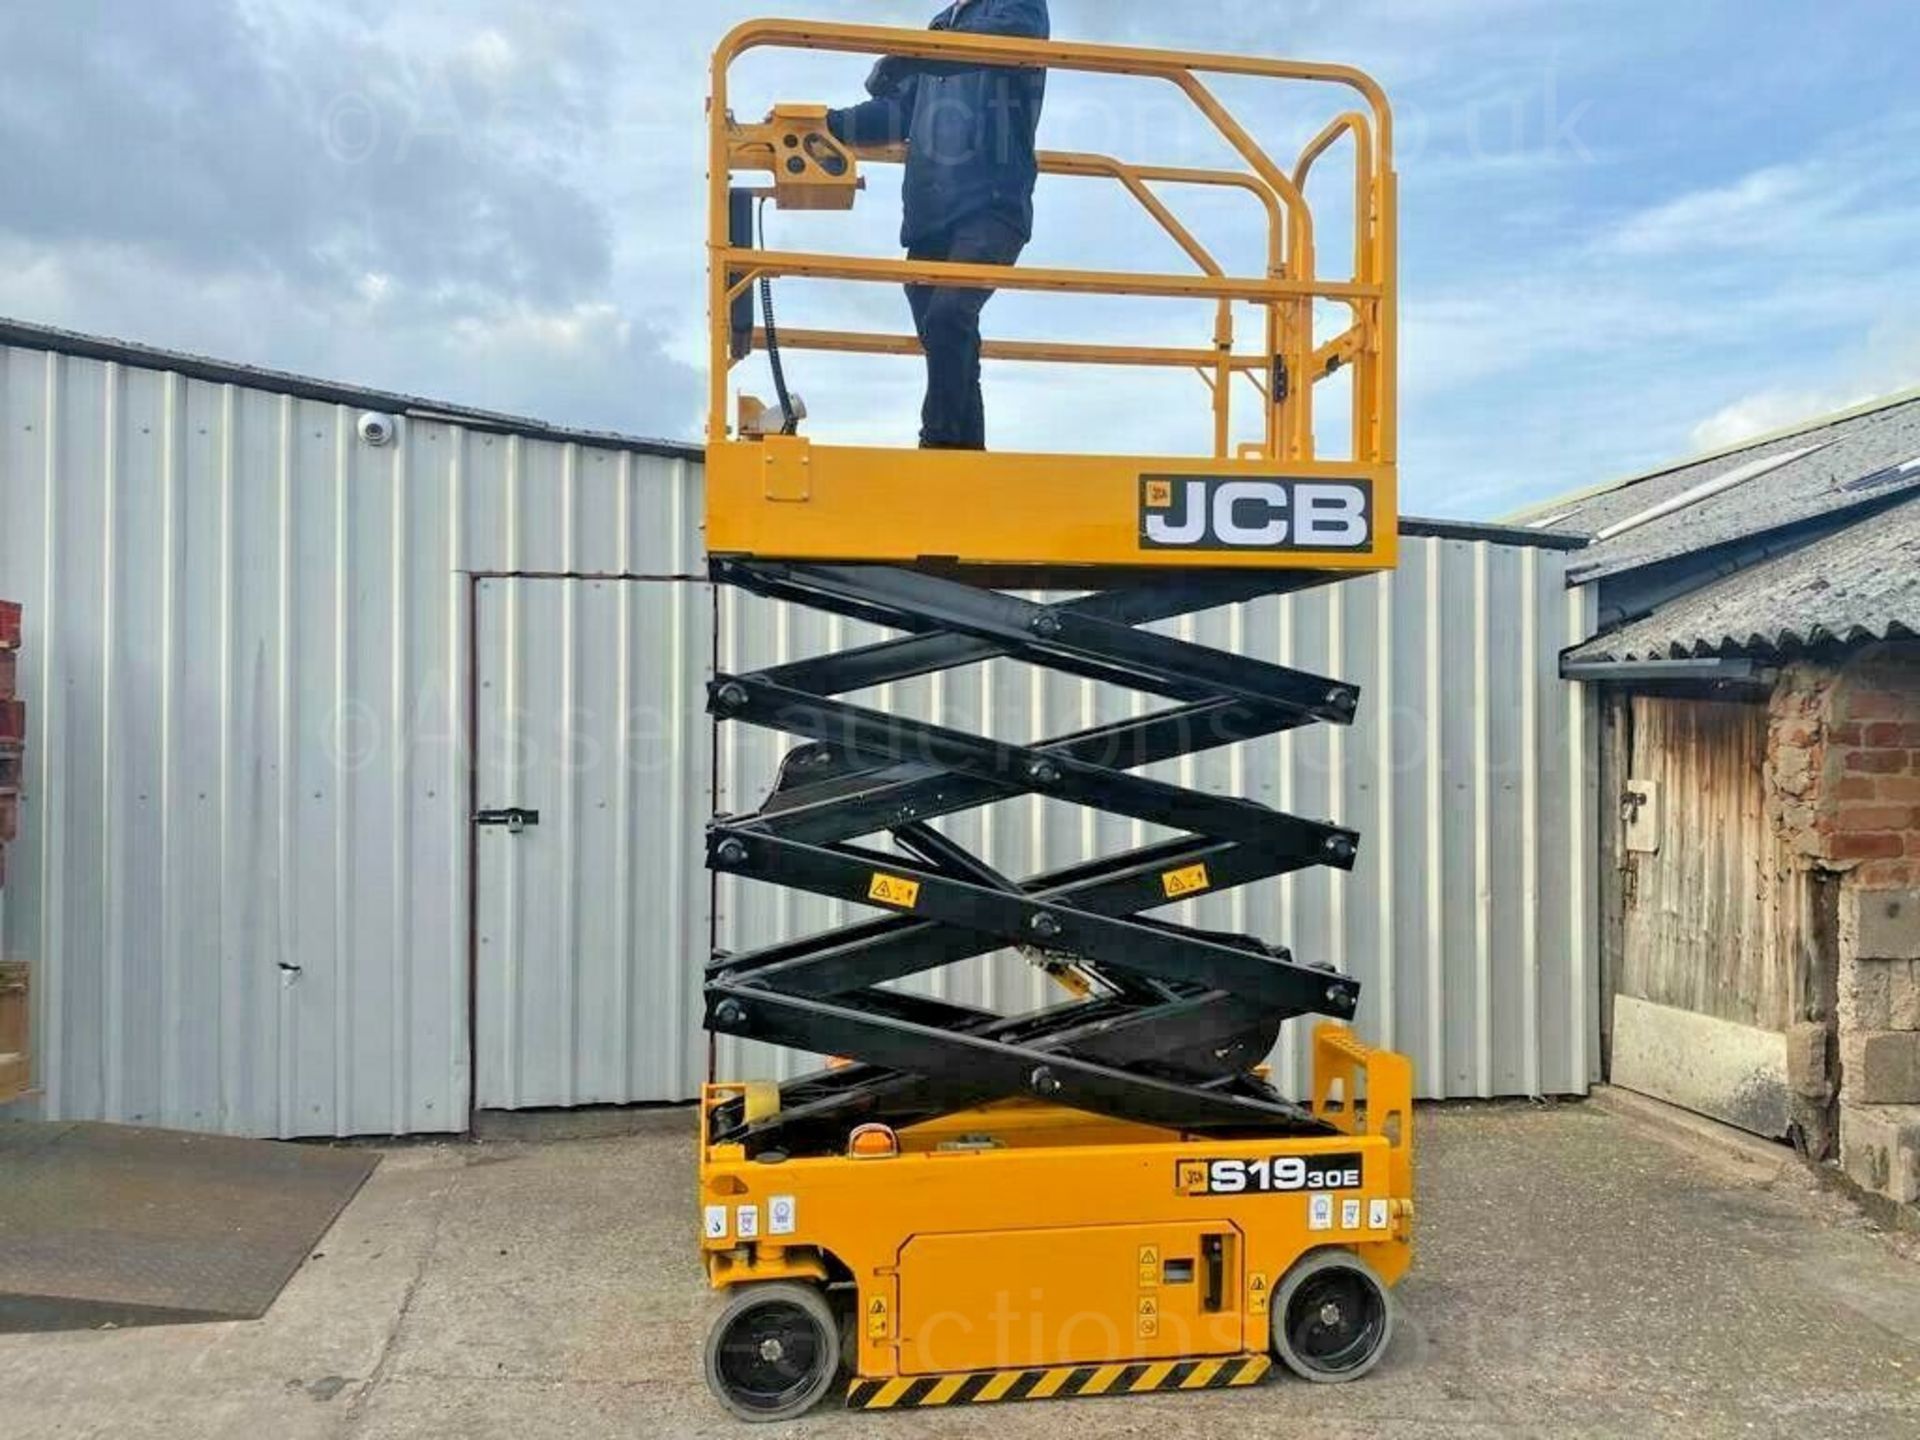 SCISSOR LIFT JCB S1930E ELECTRIC, PLATFORM HEIGHT 5.8m/ 19ft, ONLY 98.4 HOURS, YEAR 2018 *PLUS VAT* - Image 6 of 14